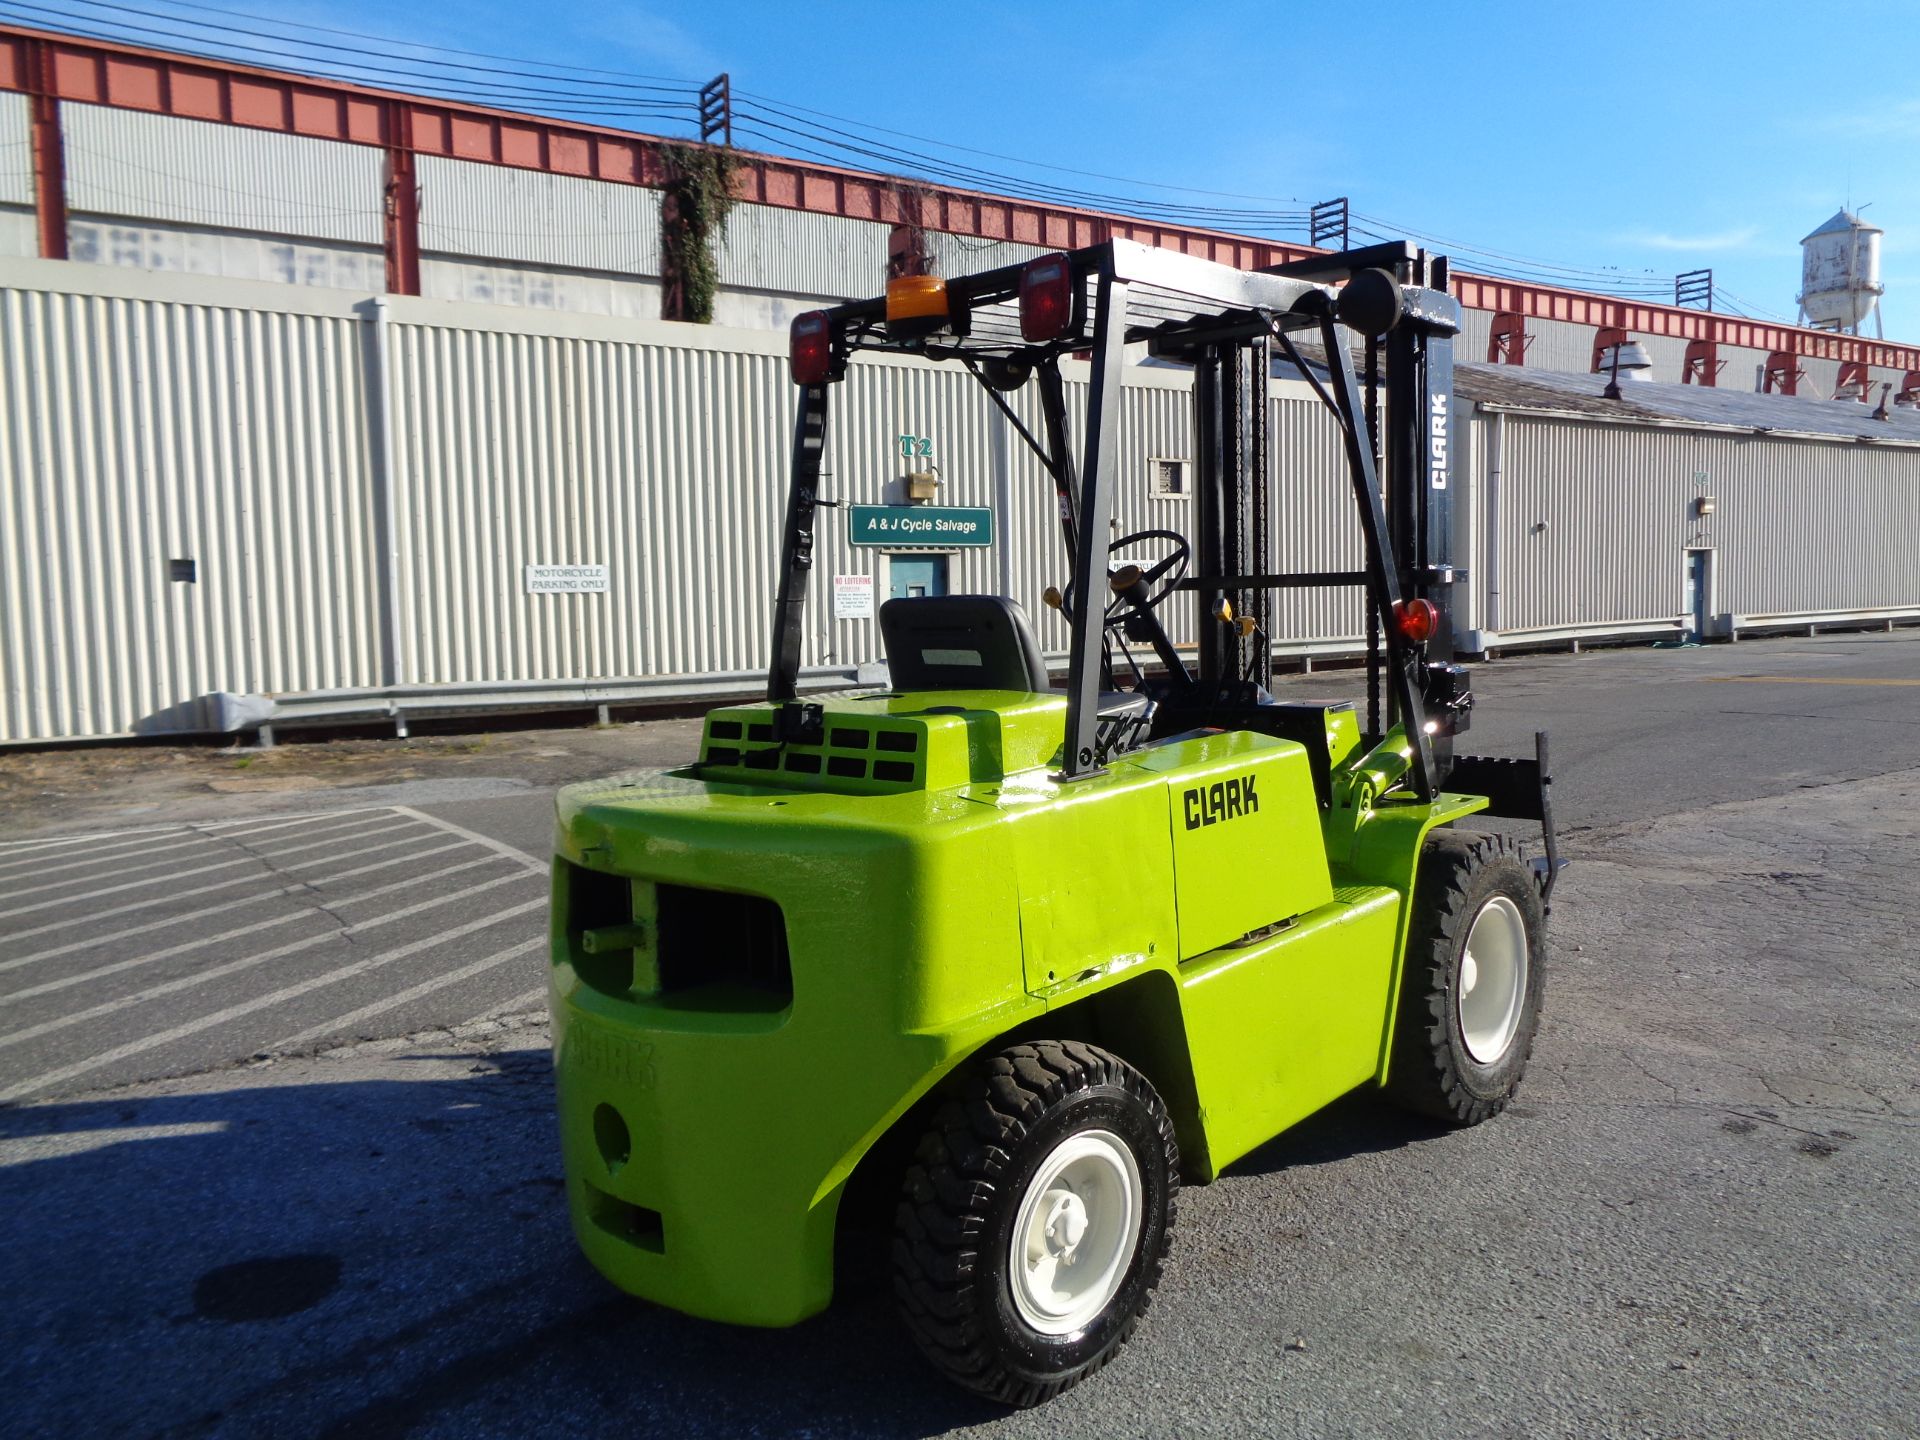 Clark C500-YS80 8,000 LBS Pneumatic Forklift - Image 9 of 11